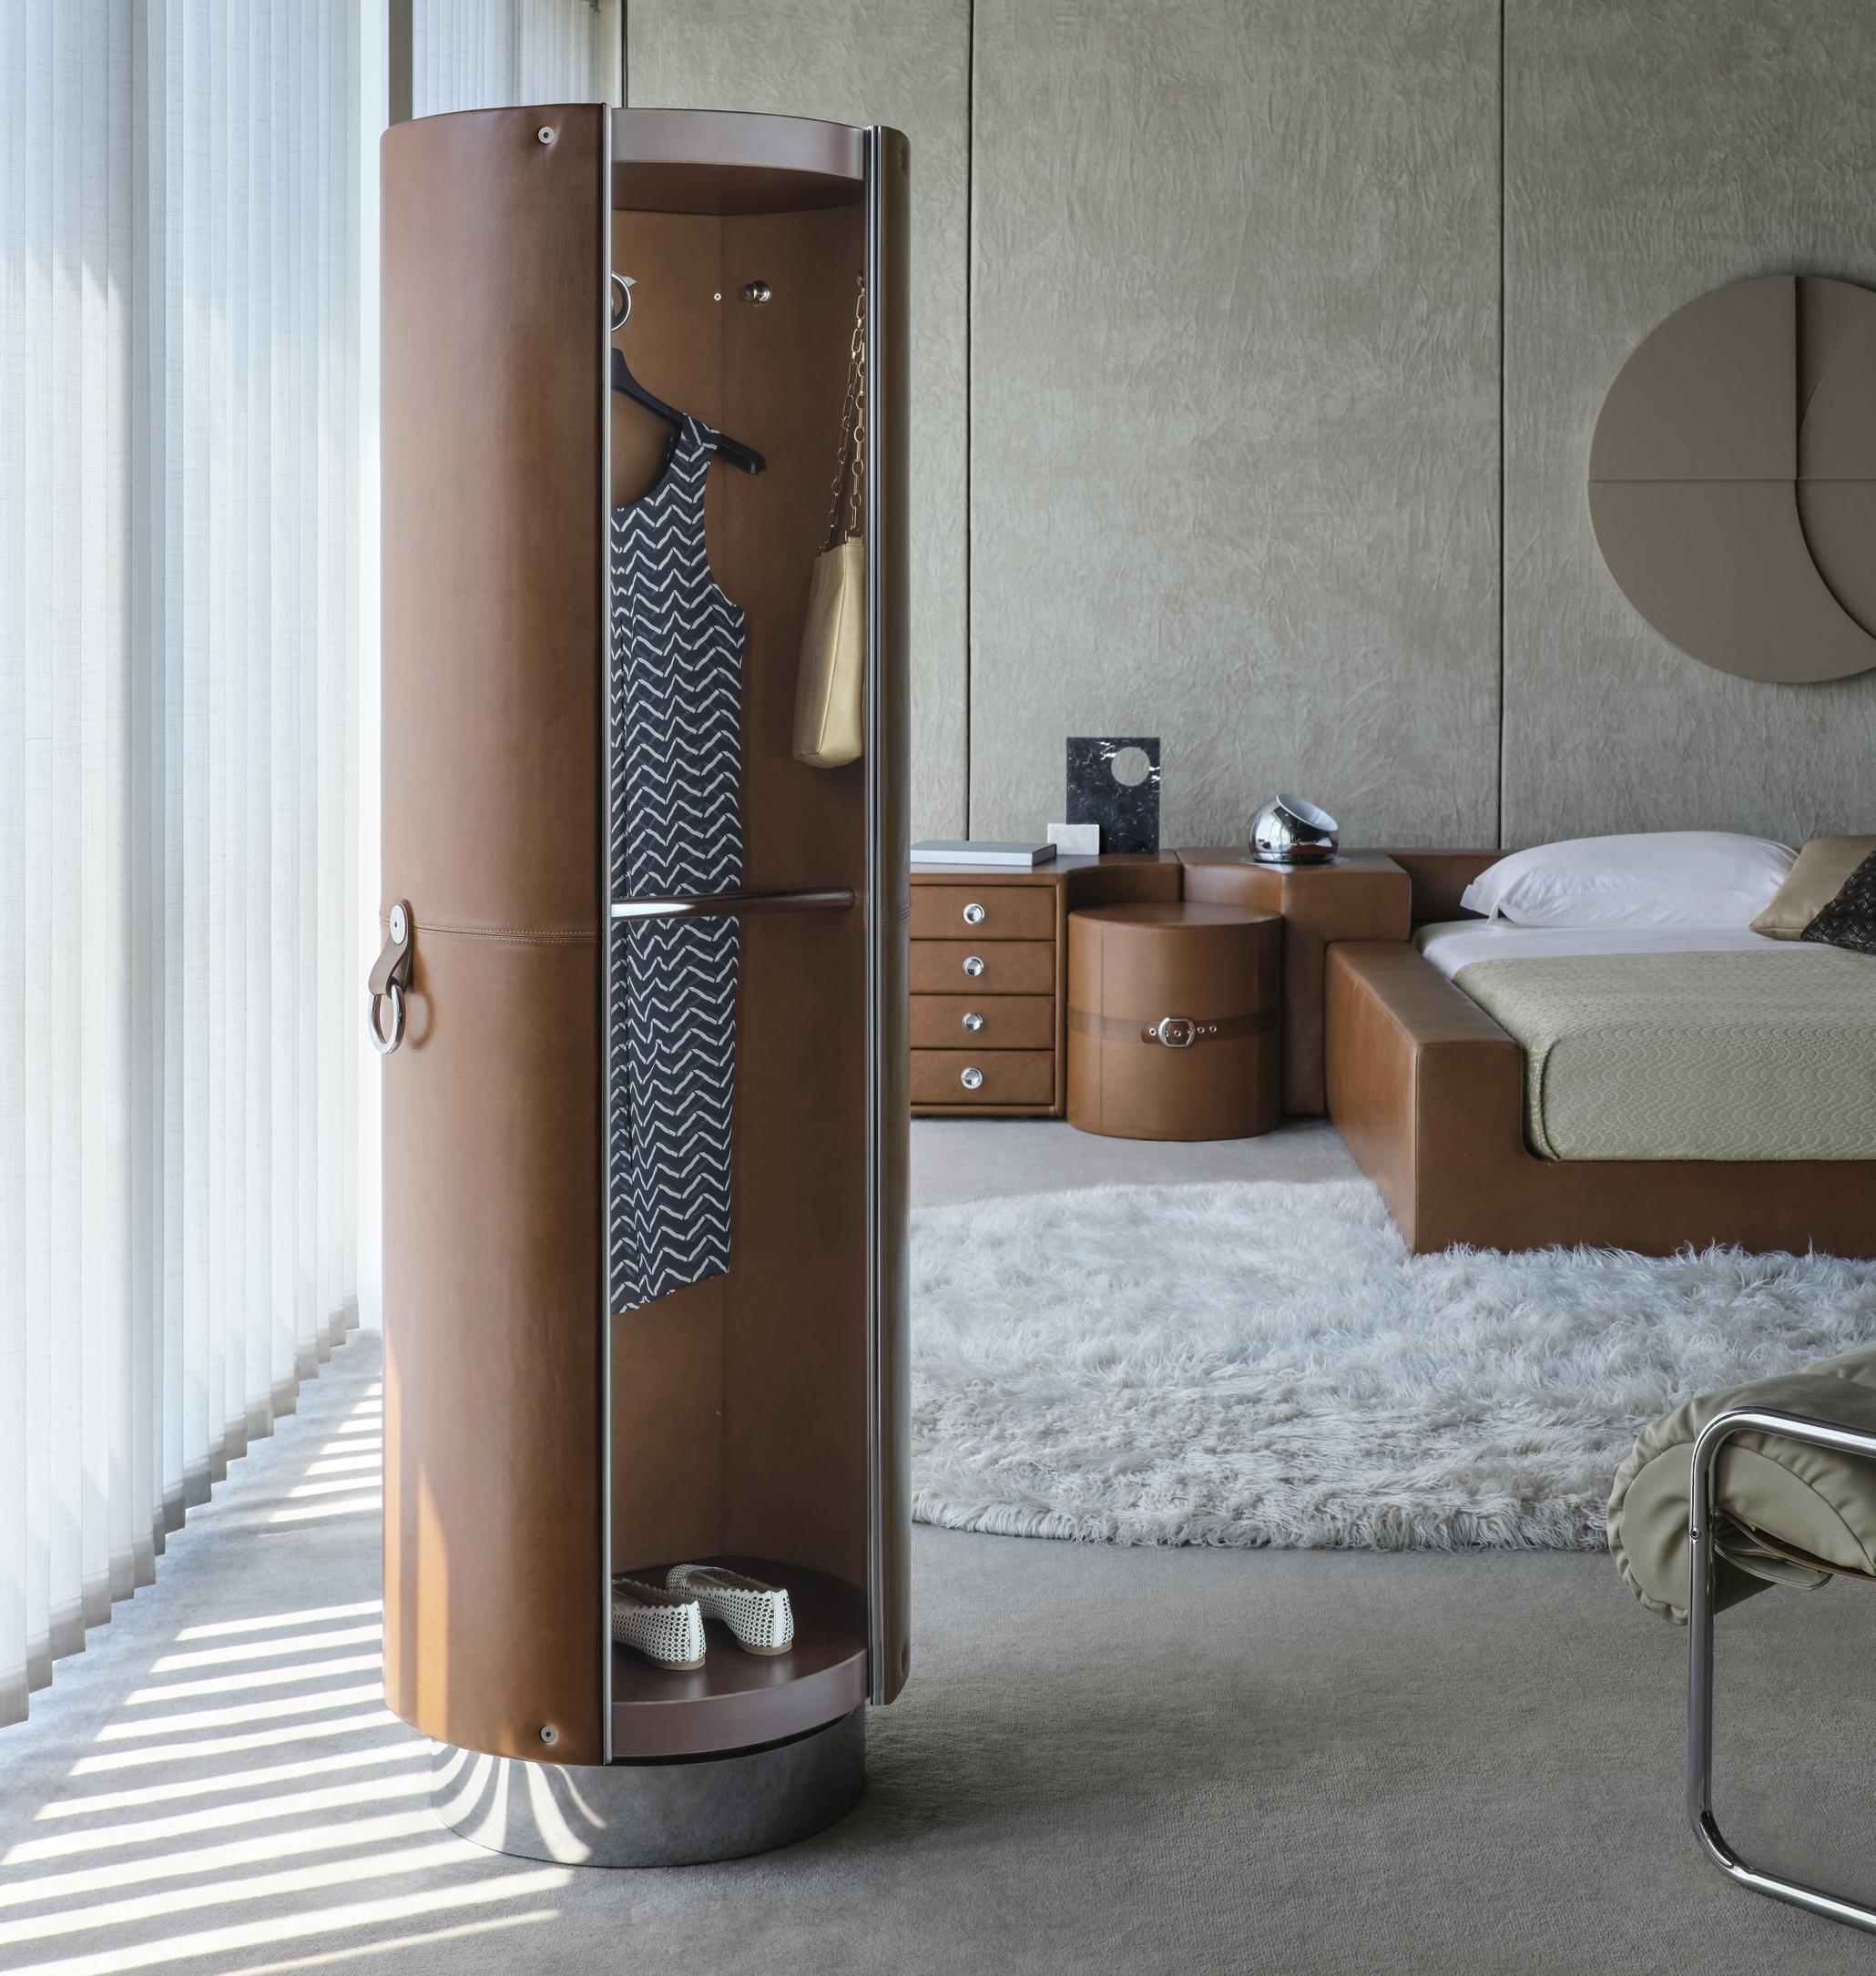 This 'Tucroma' leather rotating wardrobe was designed by Guido Faleschini in the 1970s and produced by i4Mariani (Italy). Custom colors and finishes are available. 

The Tucroma rotating armoire features a leather clad exterior with color